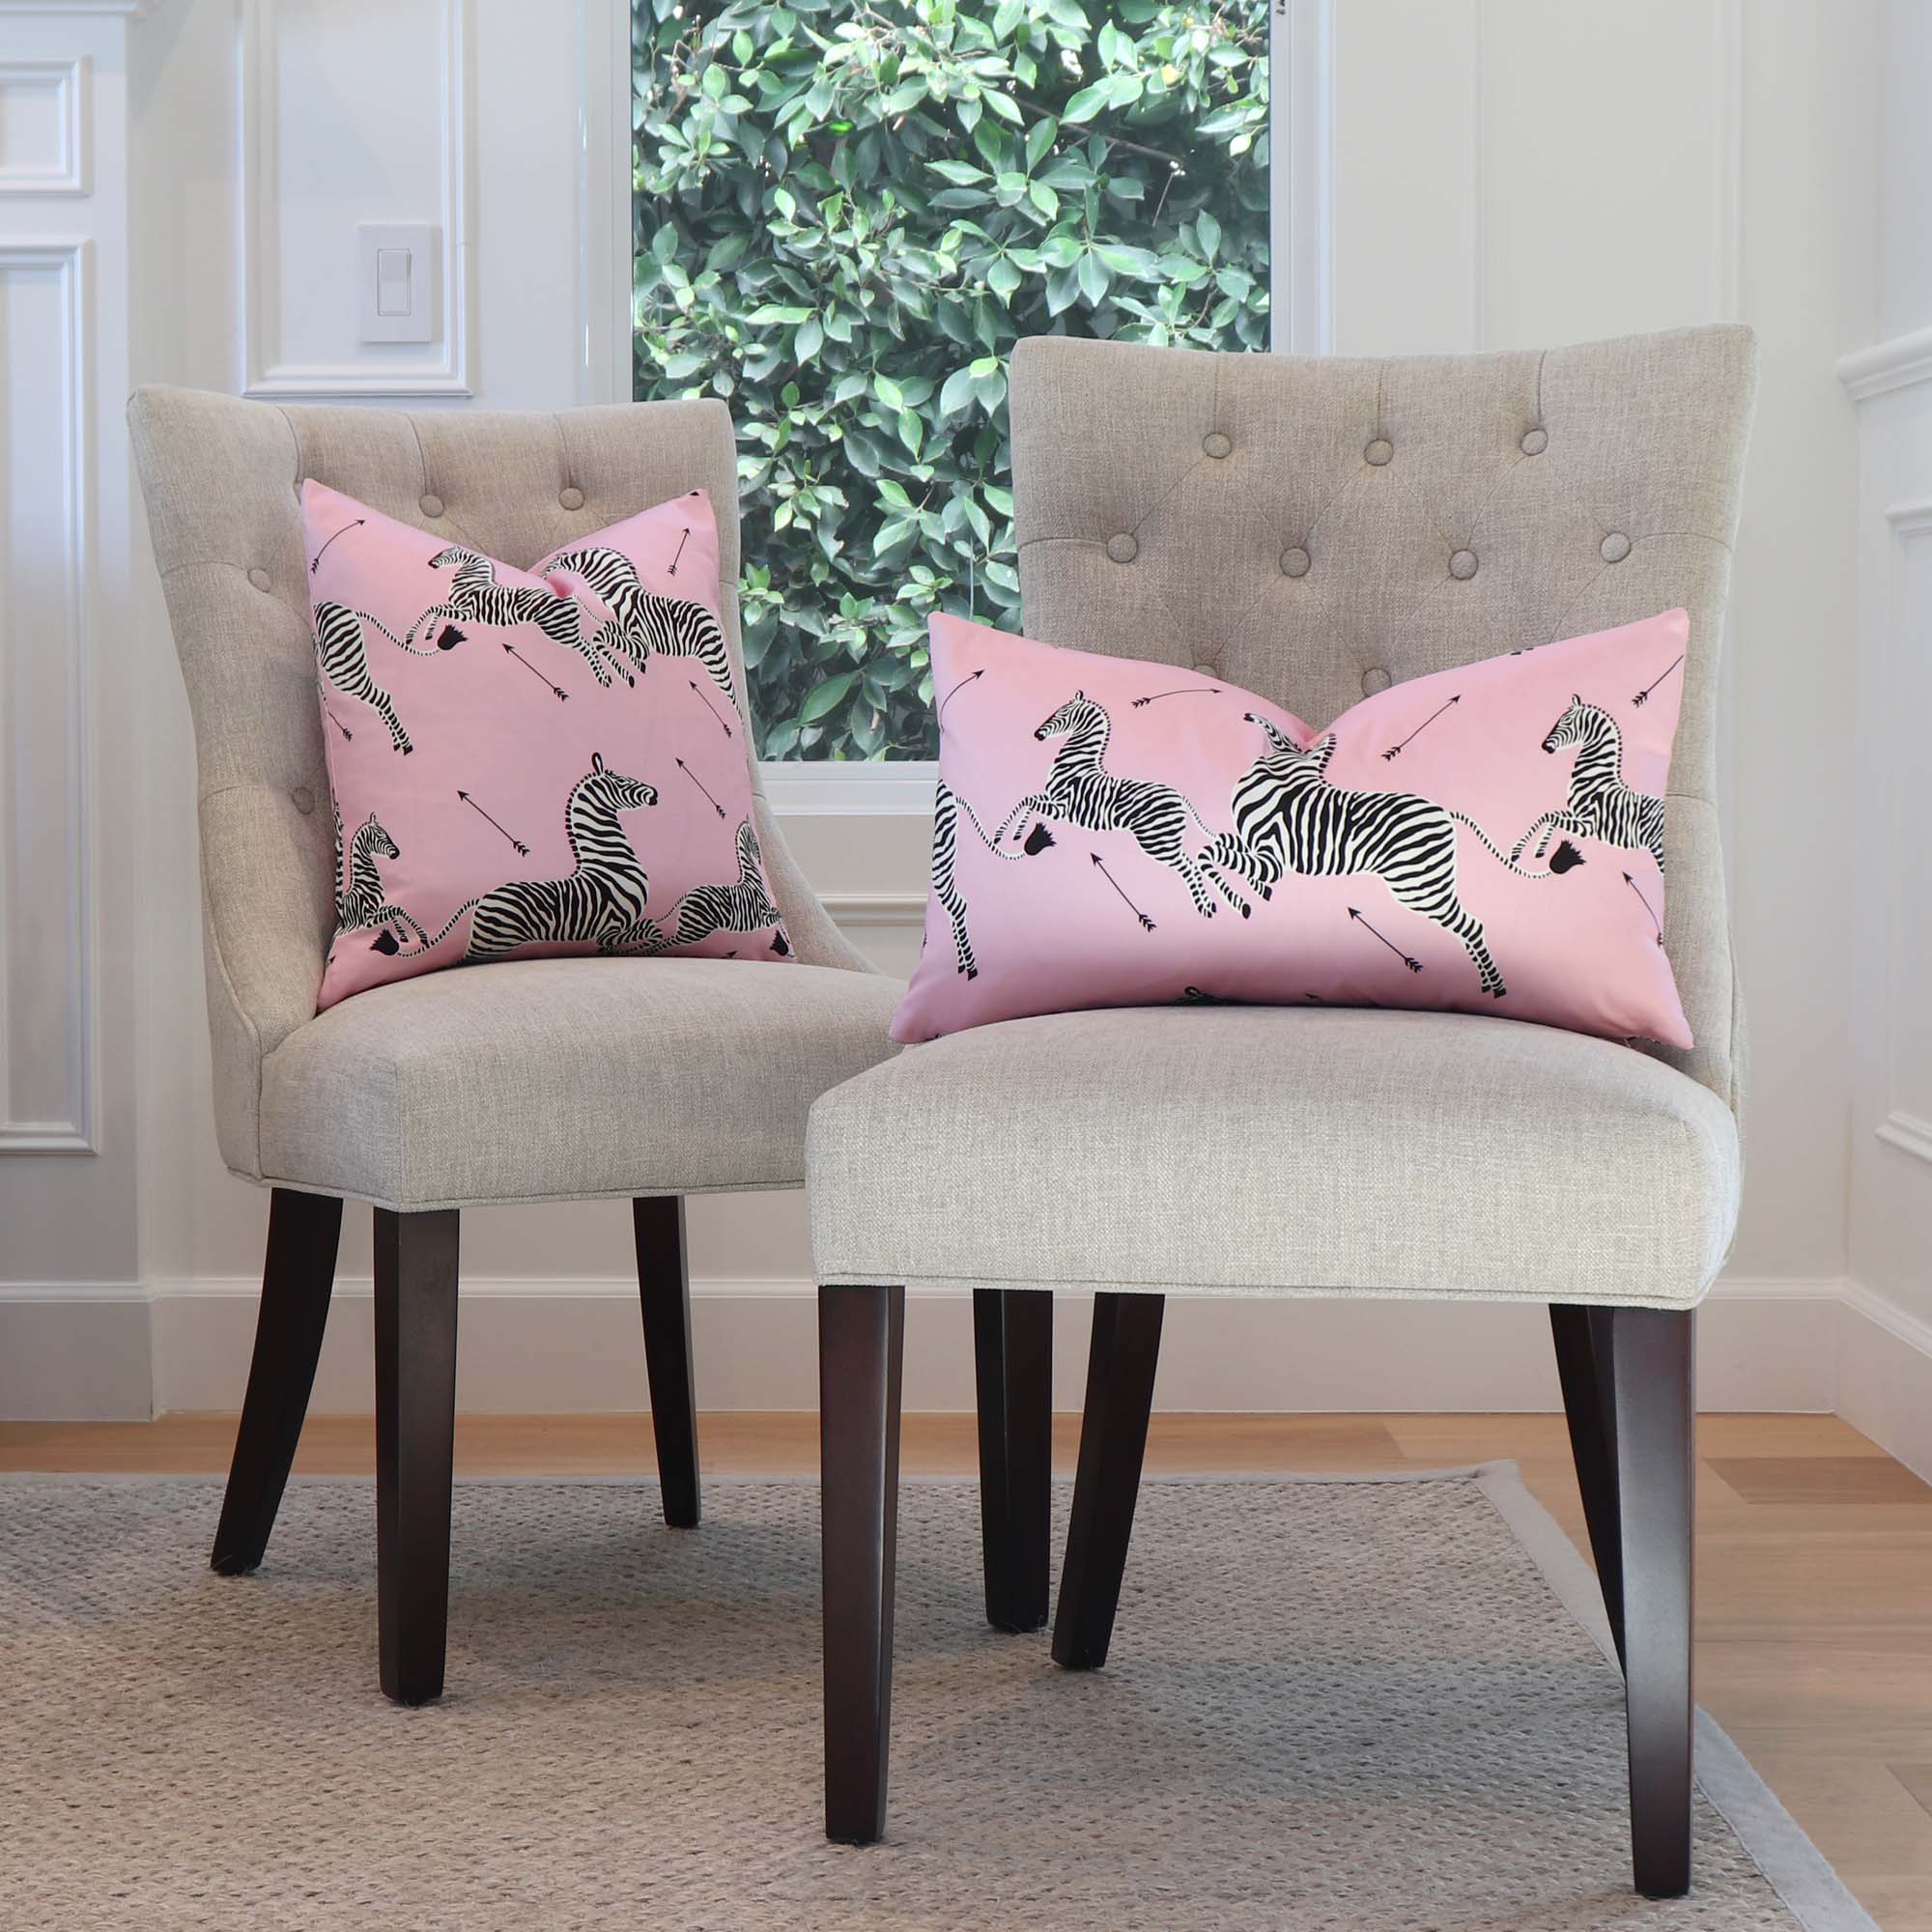 Scalamandre Zebras Petite Peony Pink Designer Animal Print Throw Pillow Cover on Chairs in Living Room